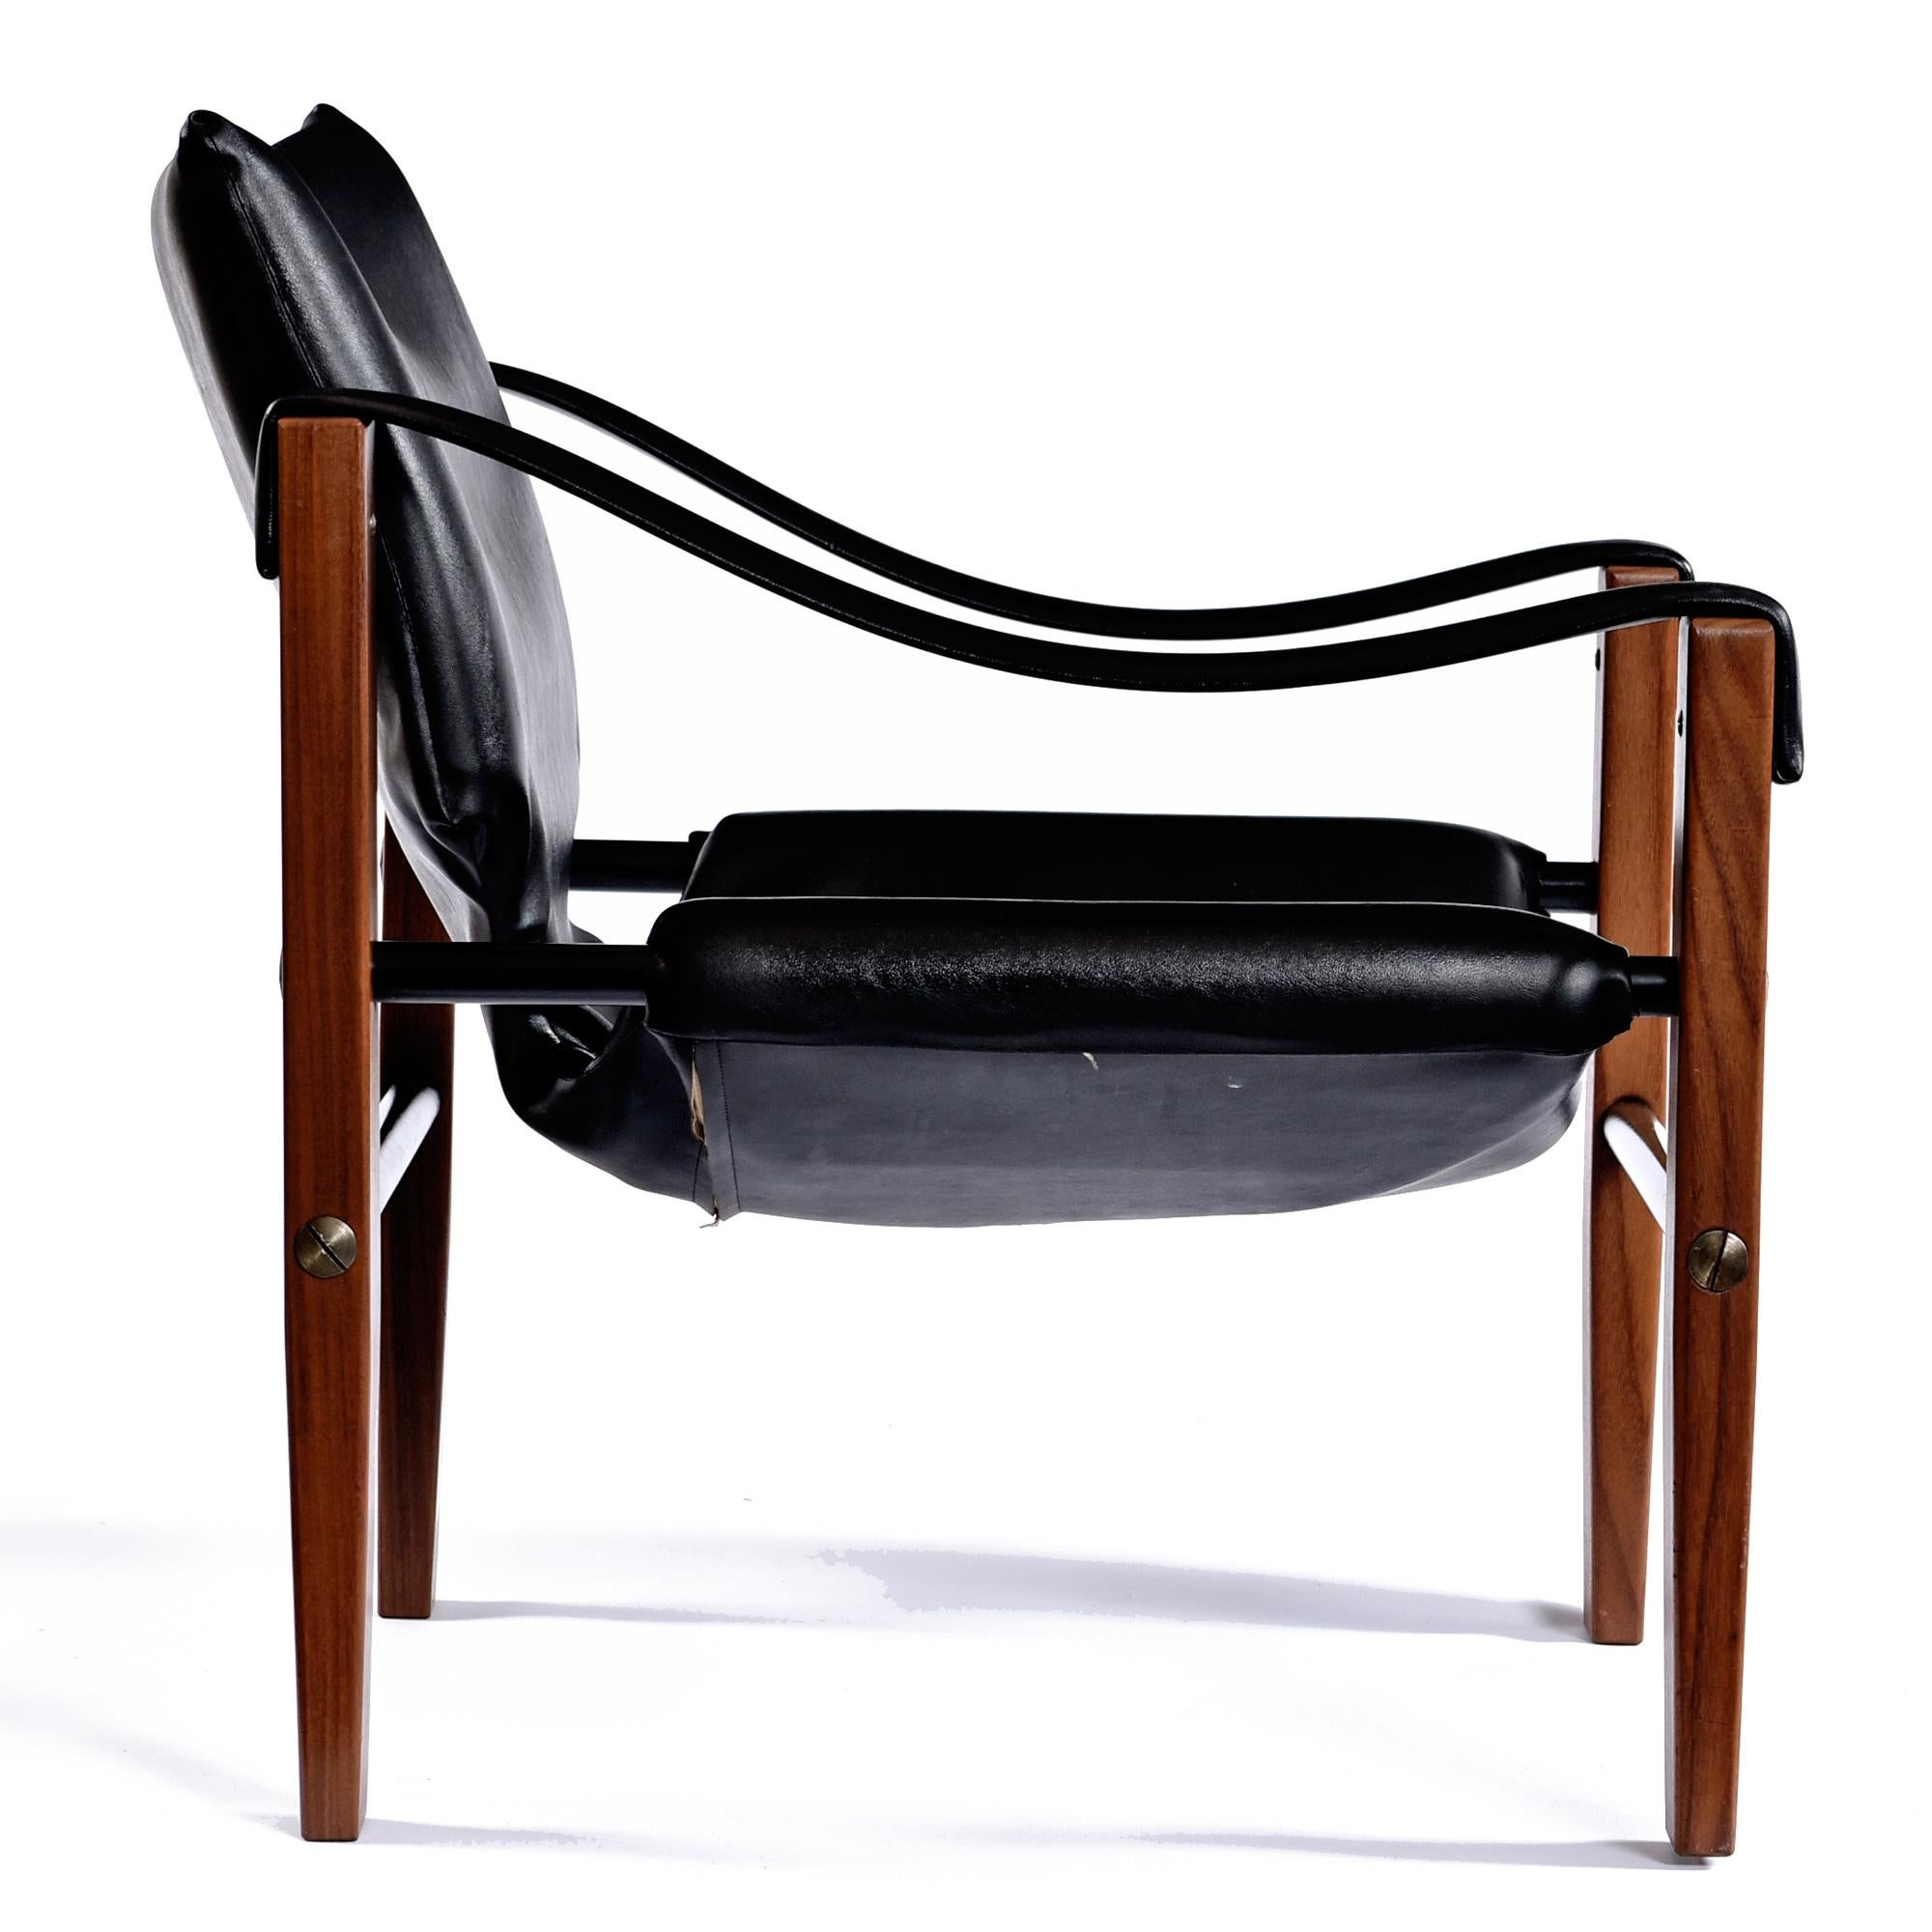 Classic and iconic Chelsea Safari Chair designed by Maurice Burke for Arkana Furniture in Scotland.  The original black leather contrasts perfectly with the reddish teak patina frame.   Black metal tube spanners create a solid stance and add to the